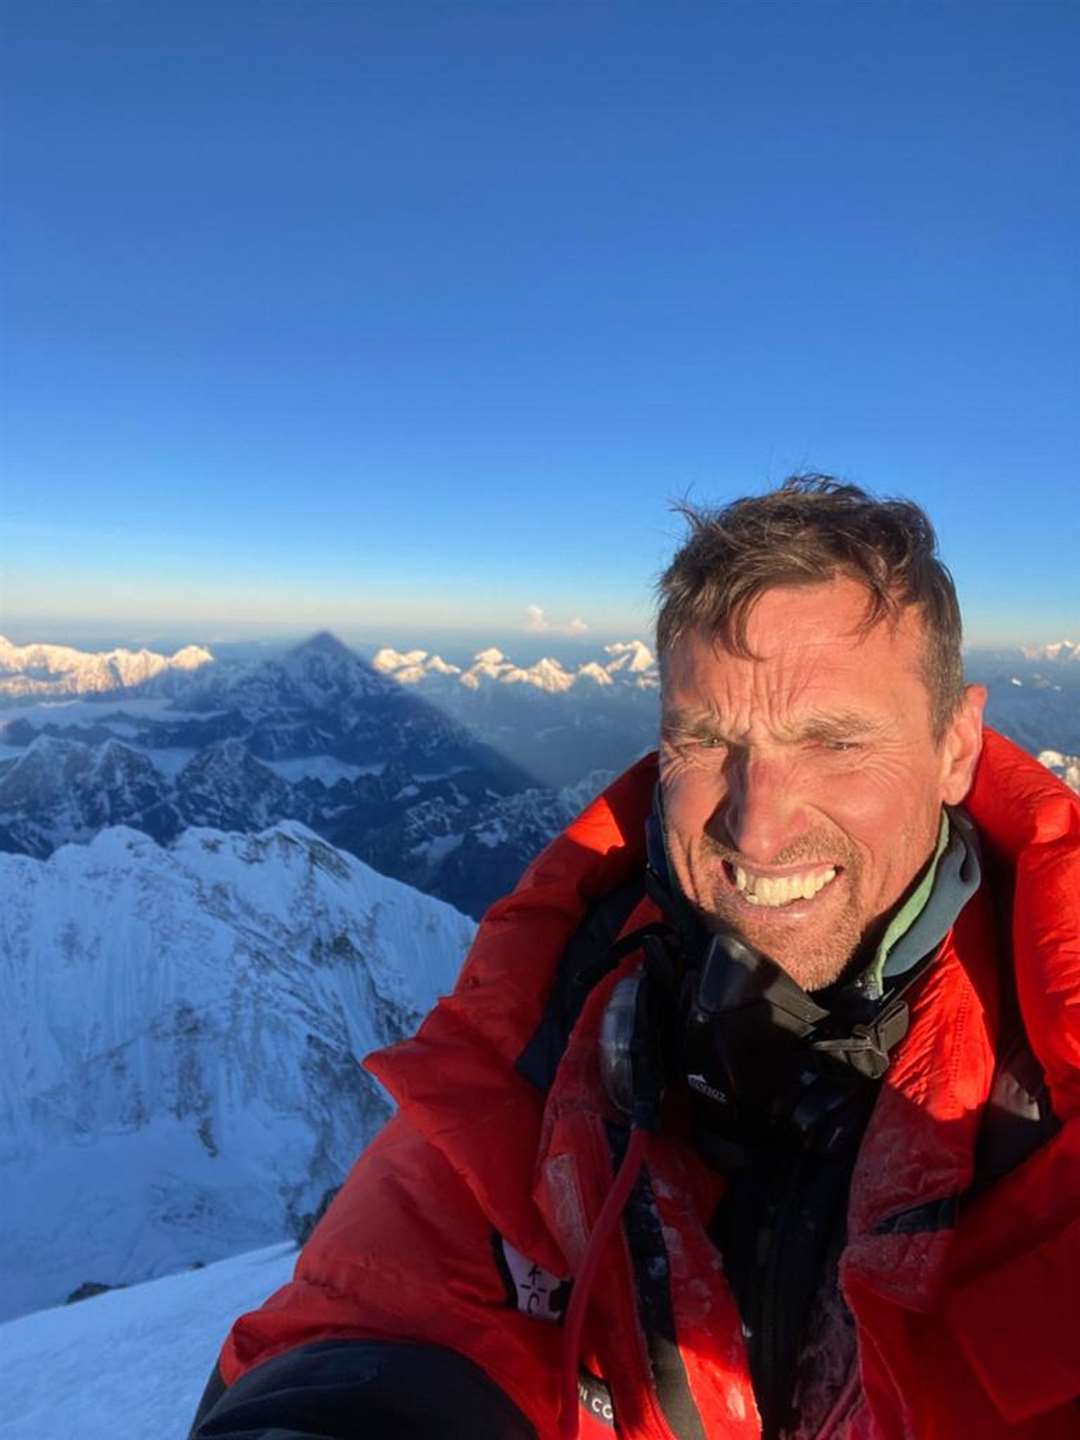 Kenton Cool reached the summit of Mount Everest for a 16th time on May 15 (Kenton Cool/PA)